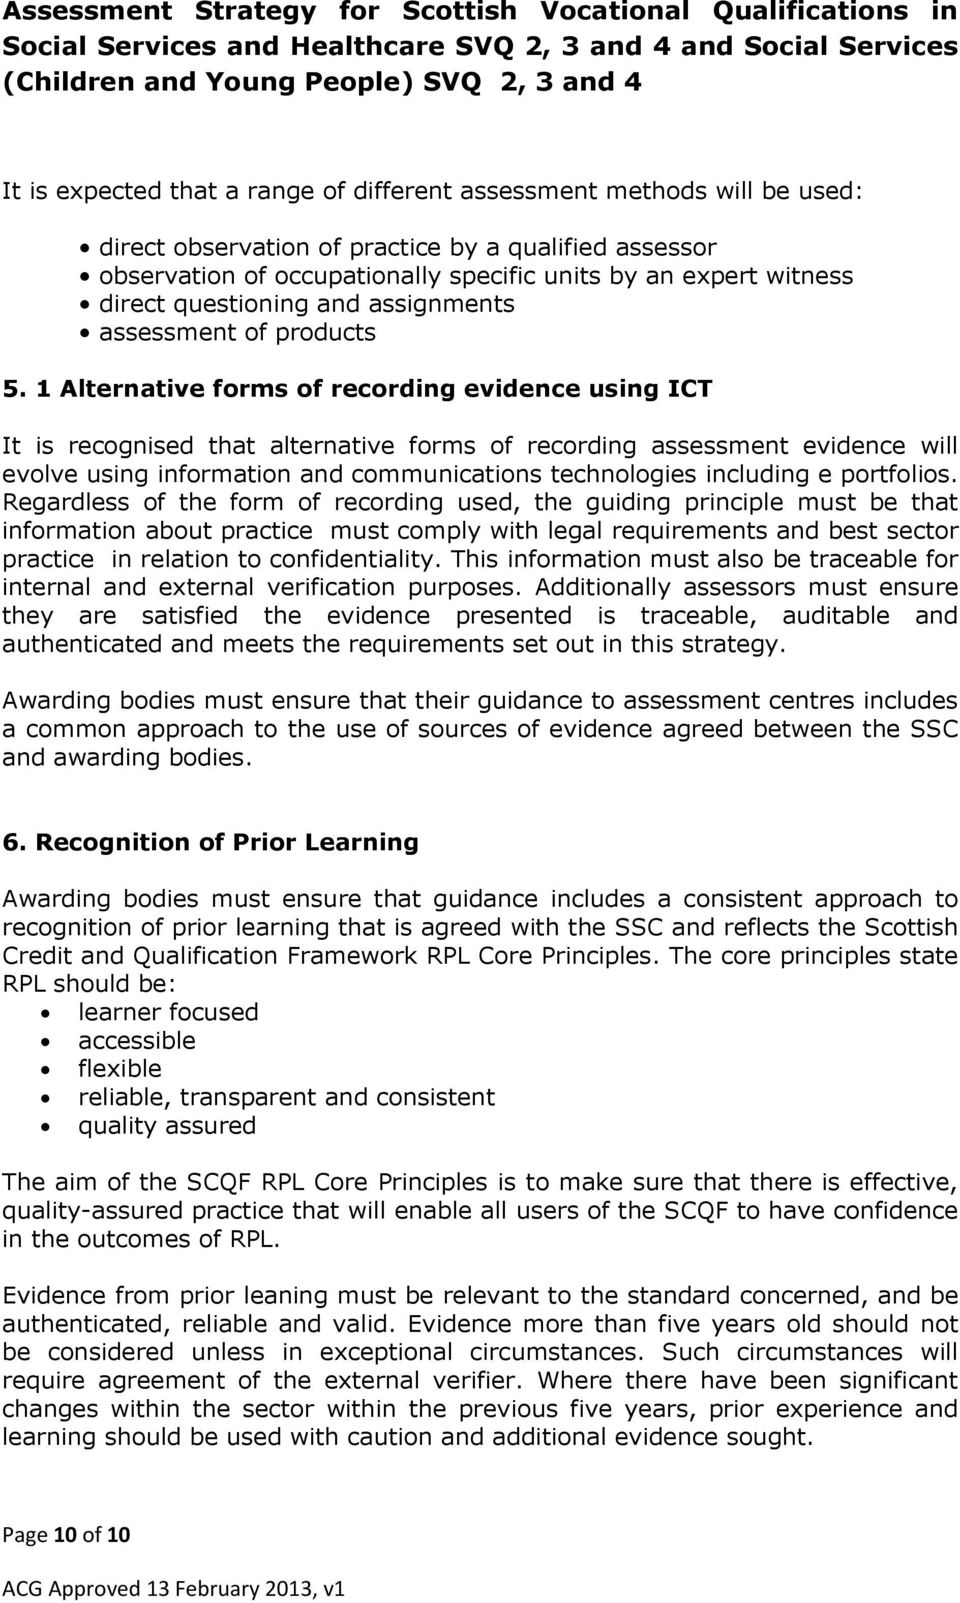 1 Alternative forms of recording evidence using ICT It is recognised that alternative forms of recording assessment evidence will evolve using information communications technologies including e